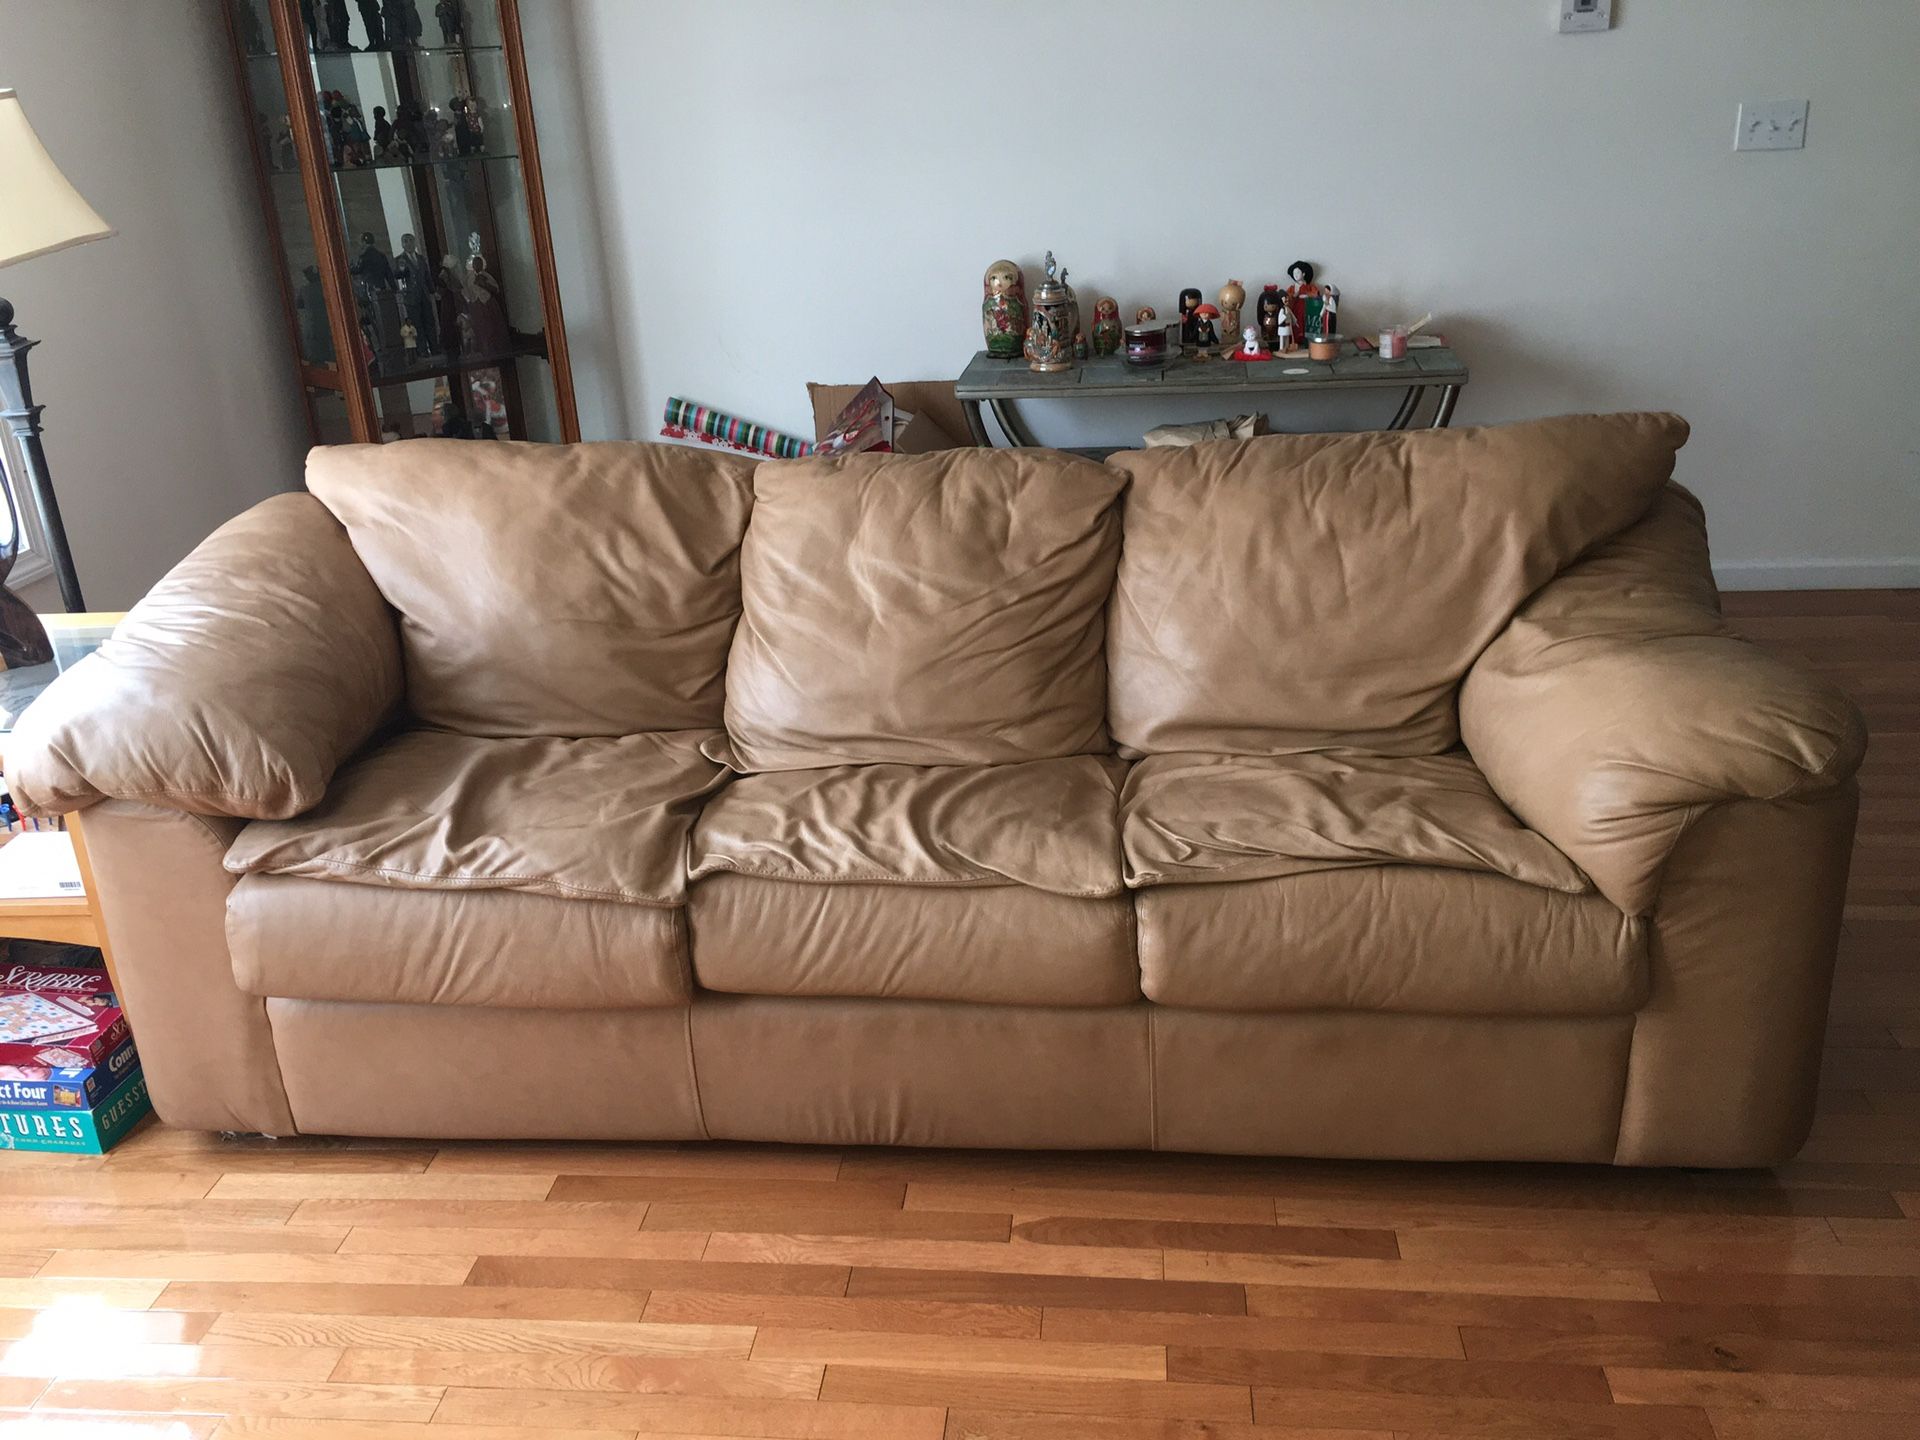 Beige Leather Sleeper Sofa and Rocker Recliner - Price Reduced to Sell